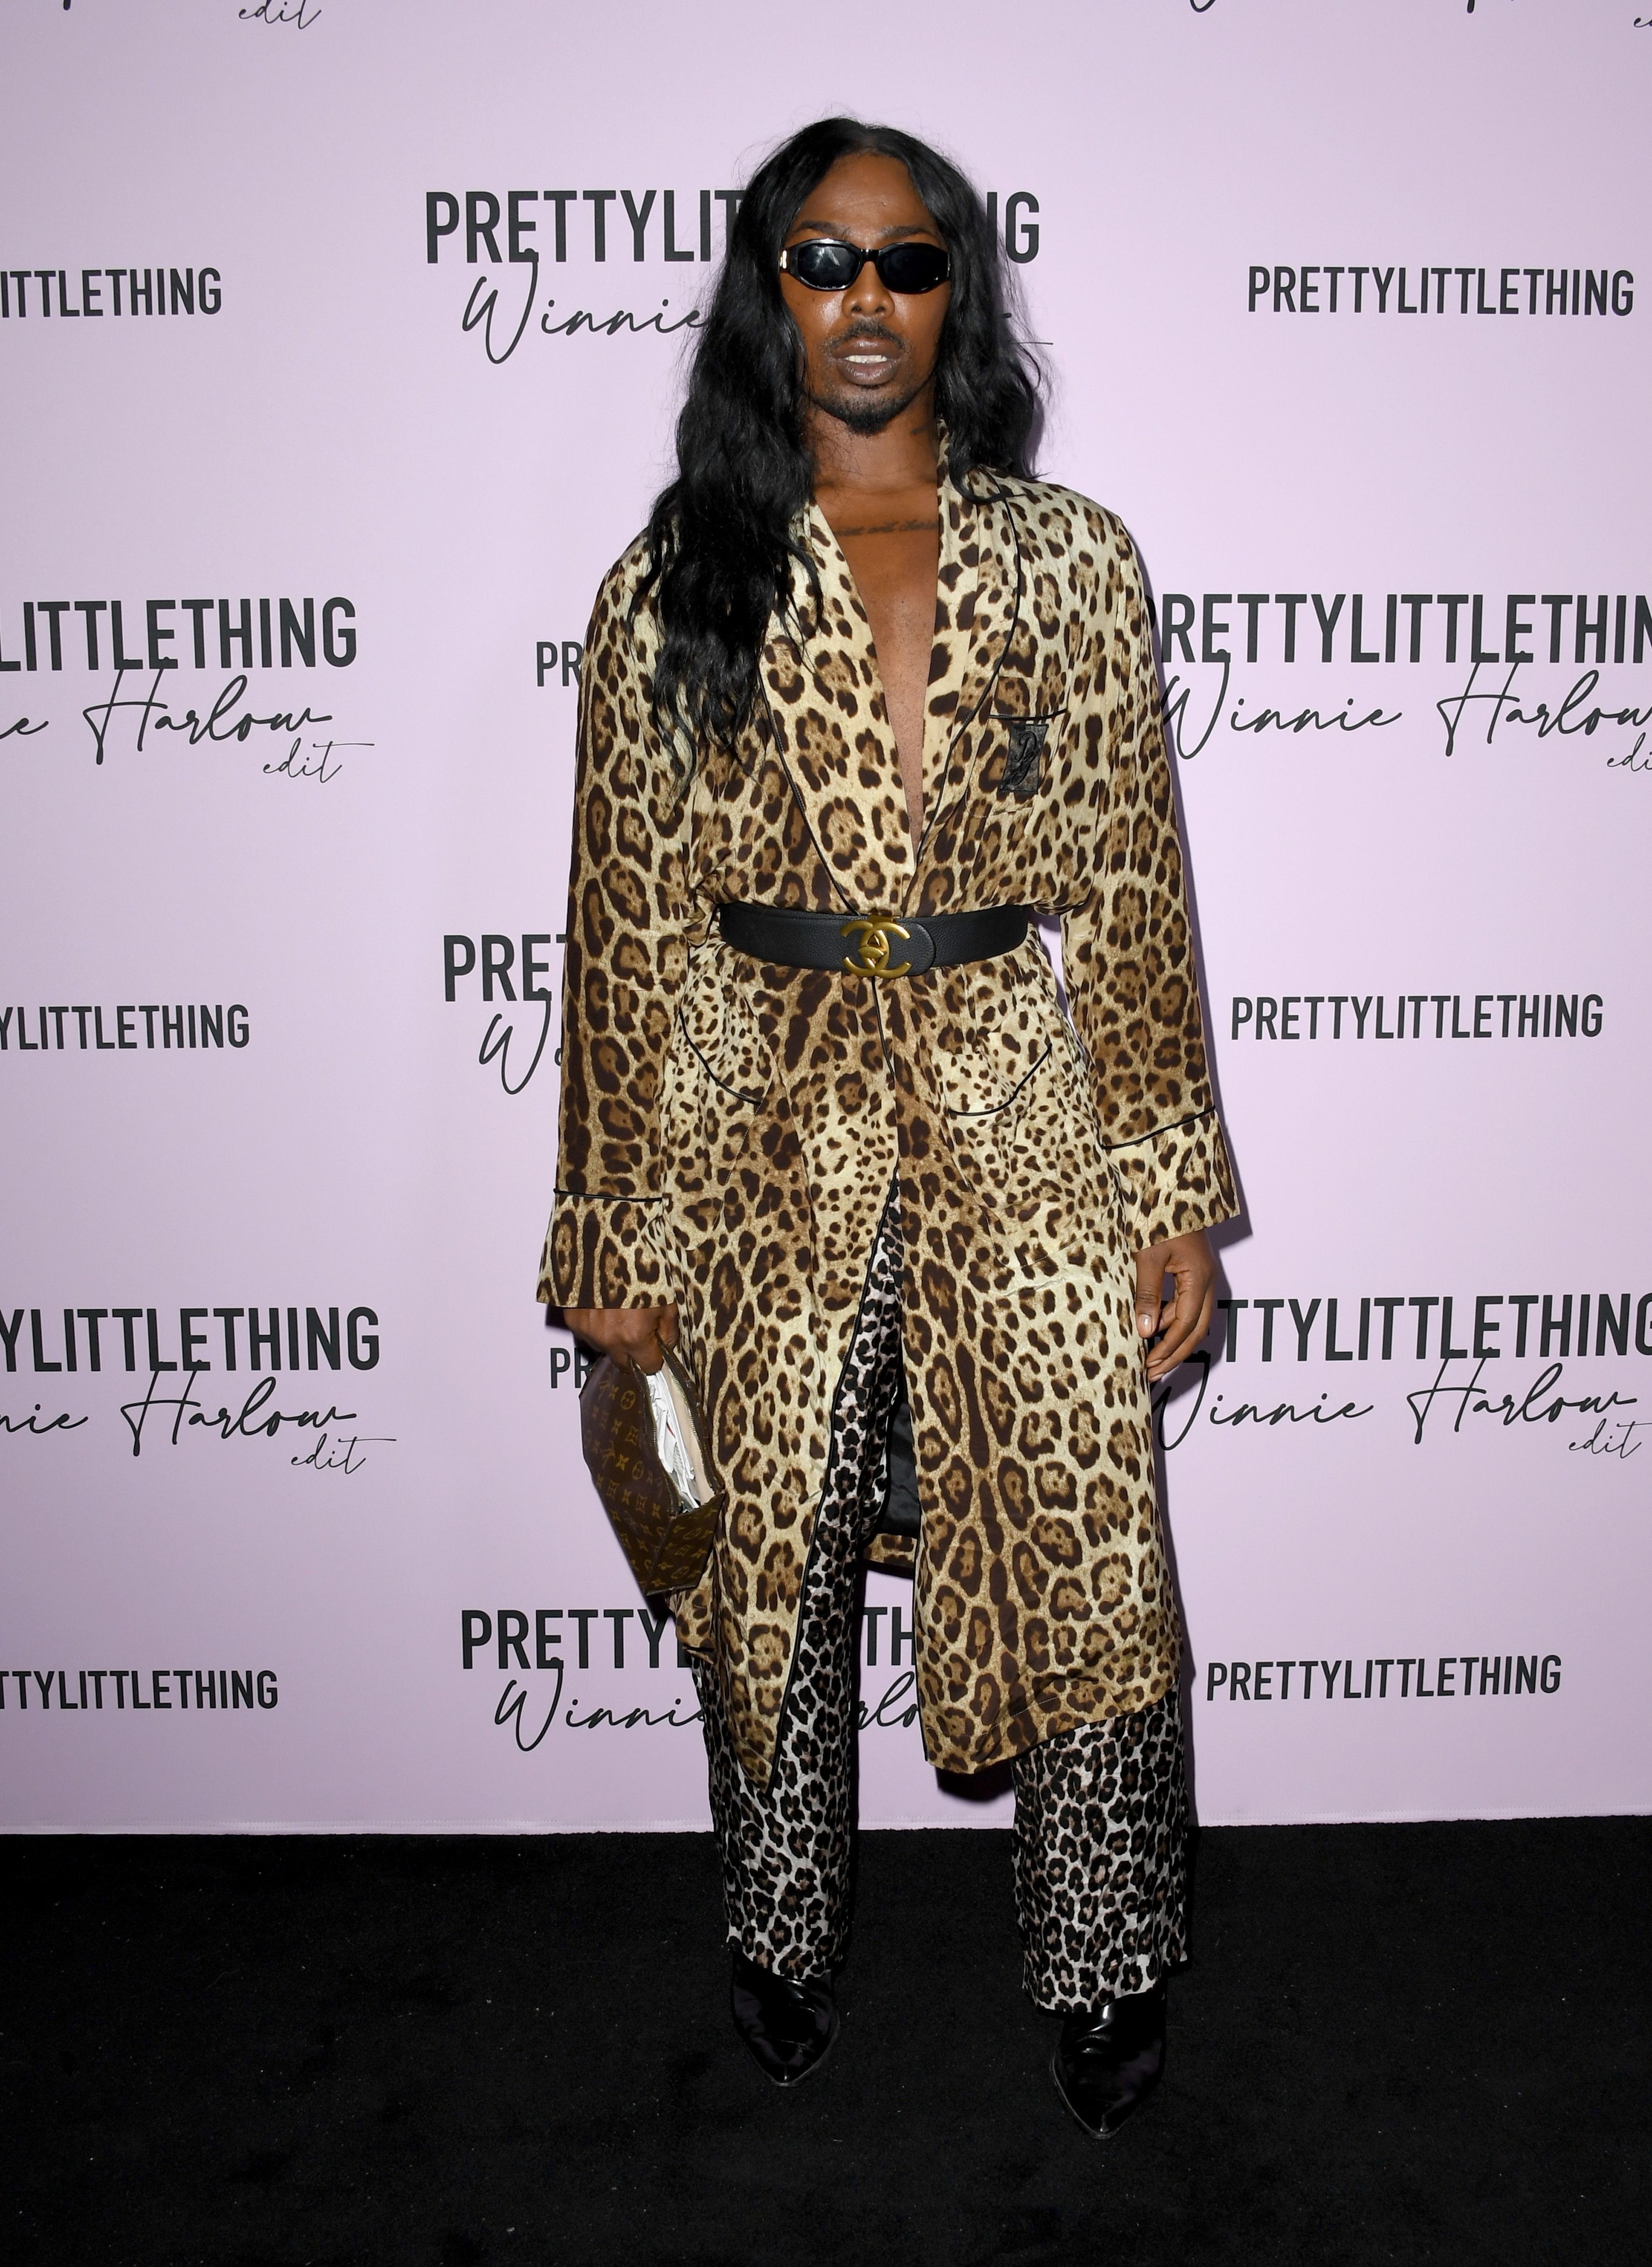 E.J. King attends the PLT x Winnie Harlow Event hosted by PrettyLittleThing at La Mesa Lounge and Restaurant